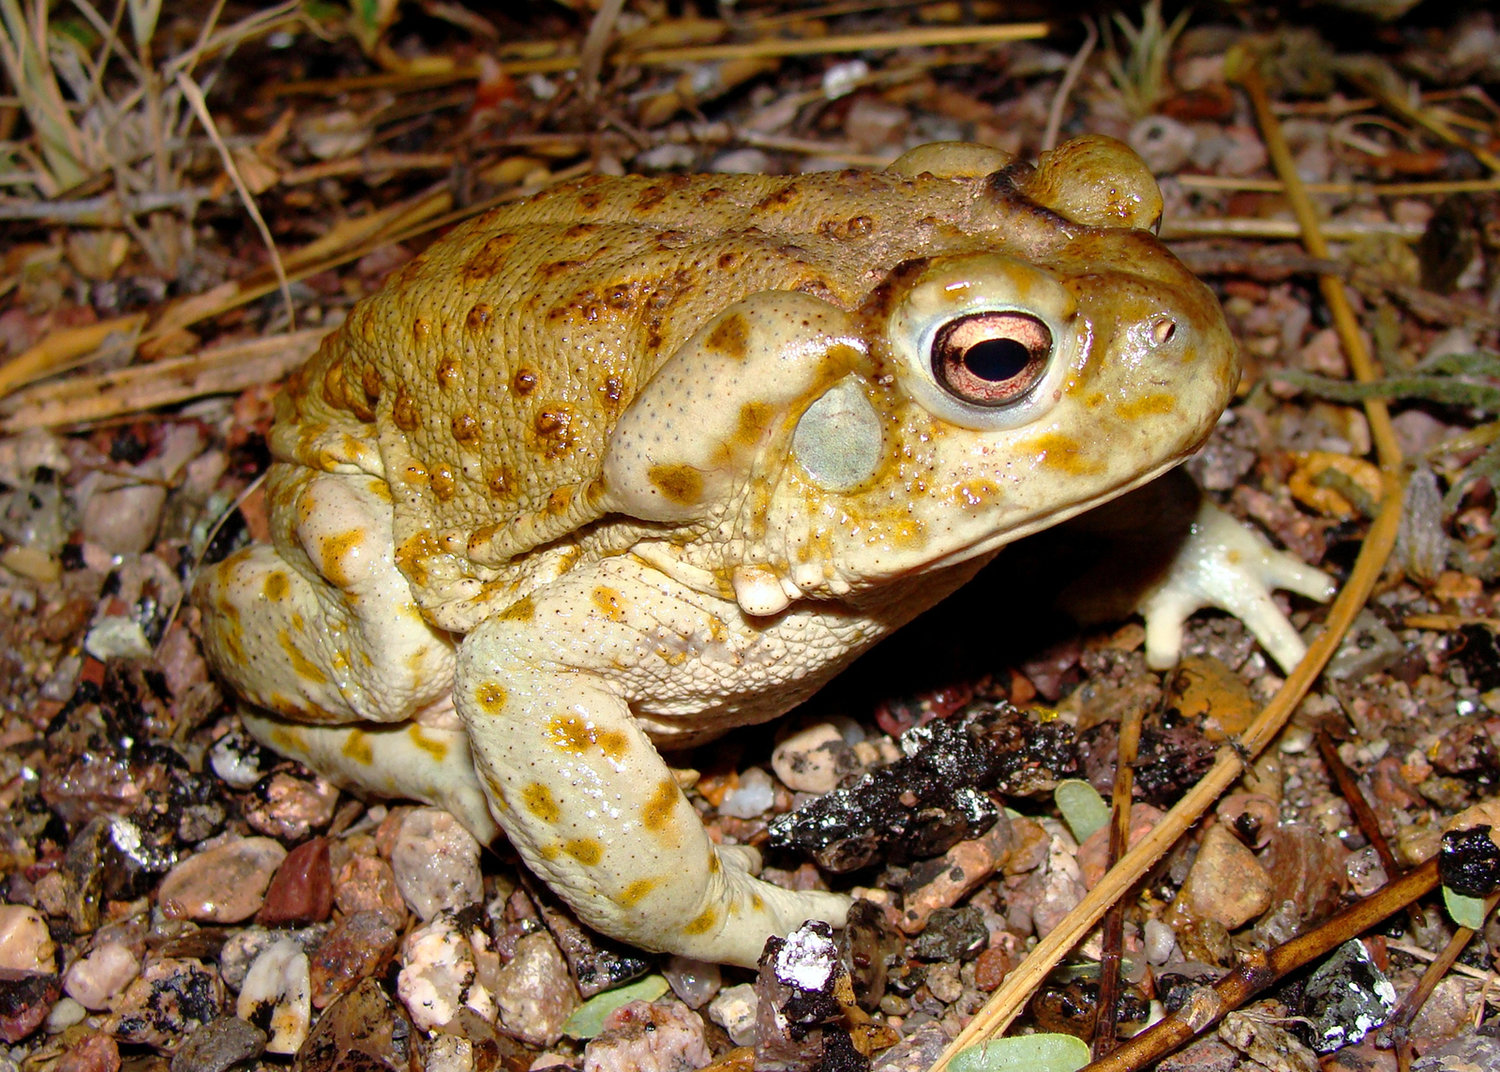 Sonoran desert toads are roughly 7 inches long and emit a weak, low-pitched cry that can be compared to a "toot," the National Park Service said in a recent public service announcement. The agency asked guests to not lick the toad's potent toxin that carries hallucinogenic properties. (Dreamstime/TNS)